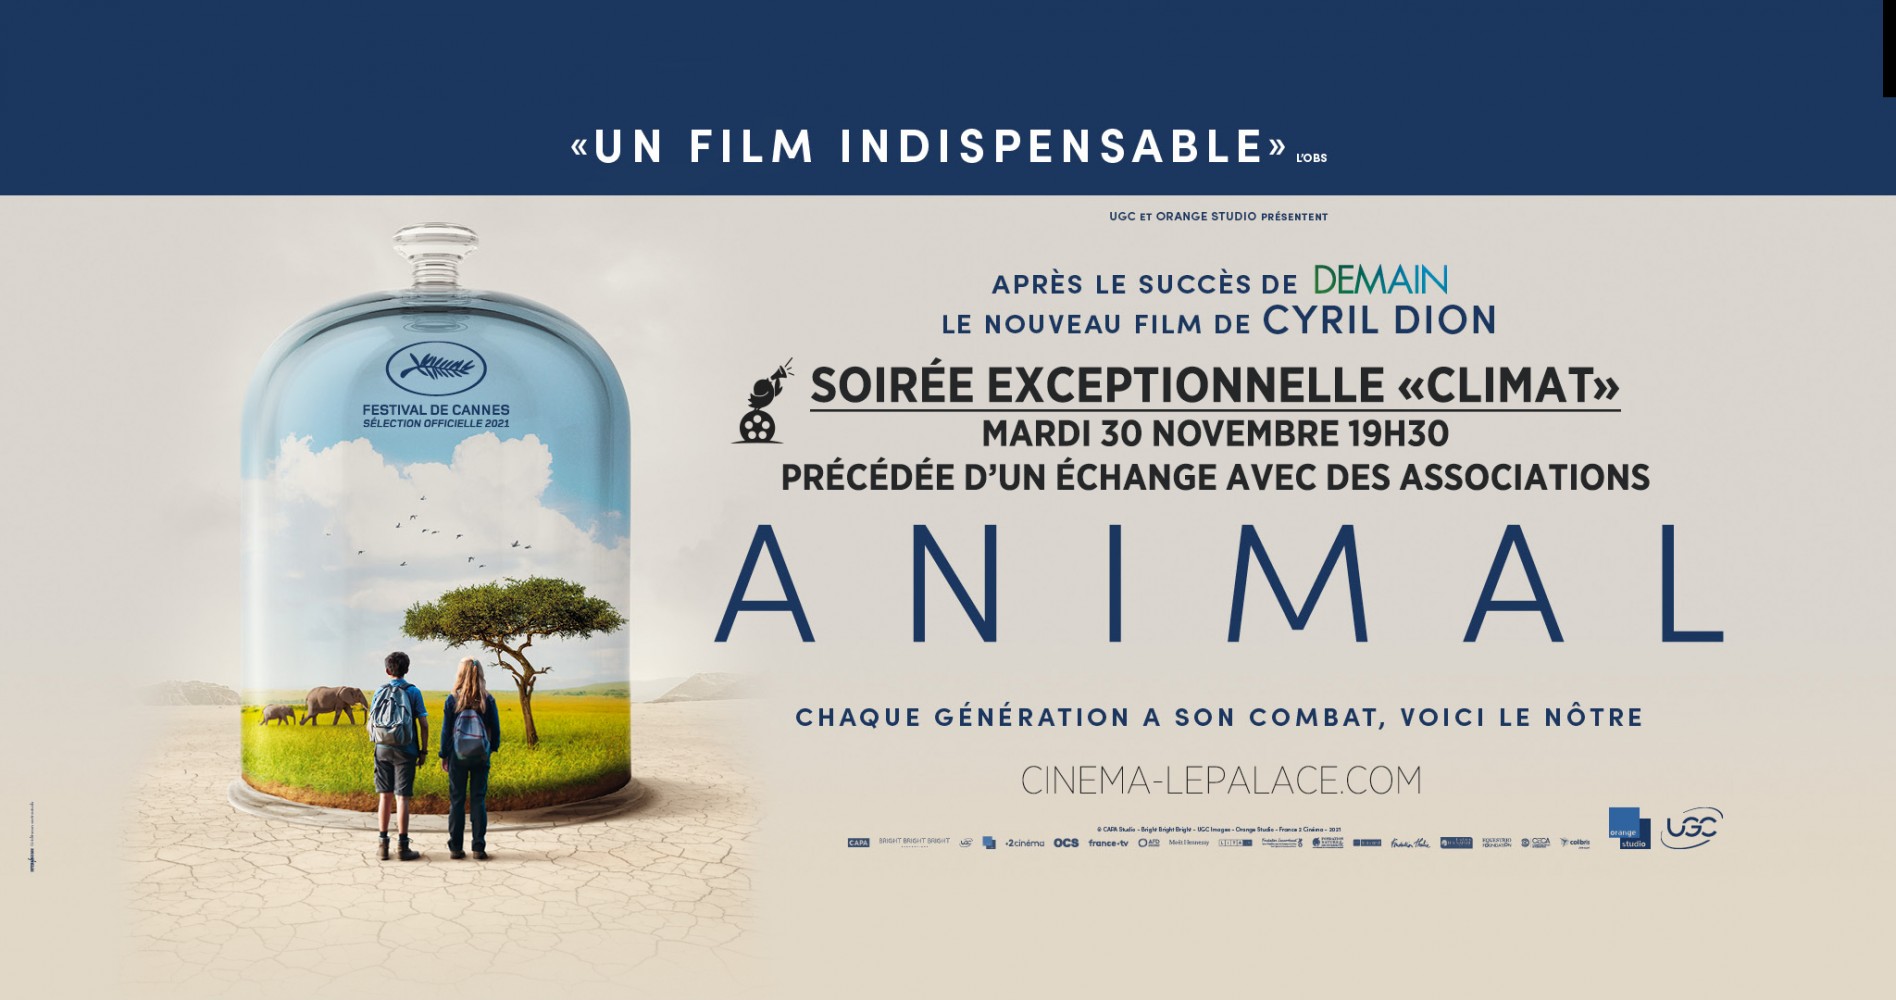 SOIREE EXCEPTIONNELLE "CLIMAT" - ANIMAL Cyril Dion